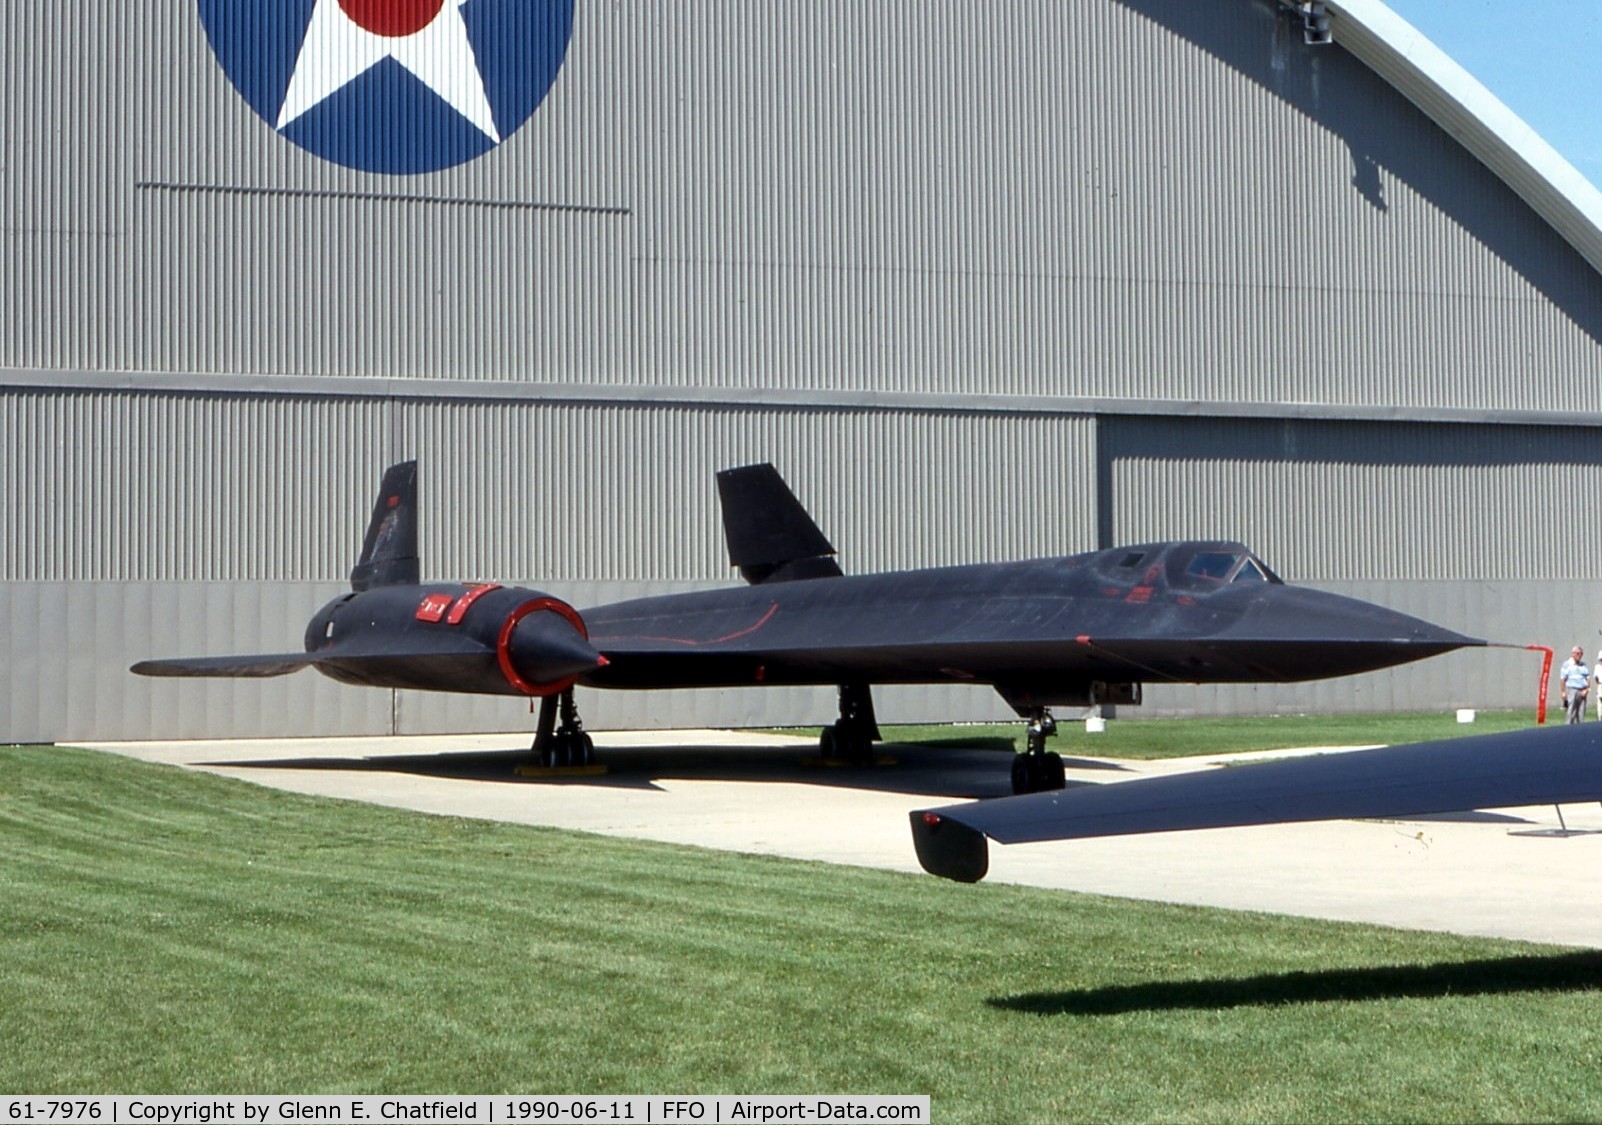 61-7976, 1961 Lockheed SR-71A Blackbird C/N 2027, SR-71A at the National Museum of the U.S. Air Force